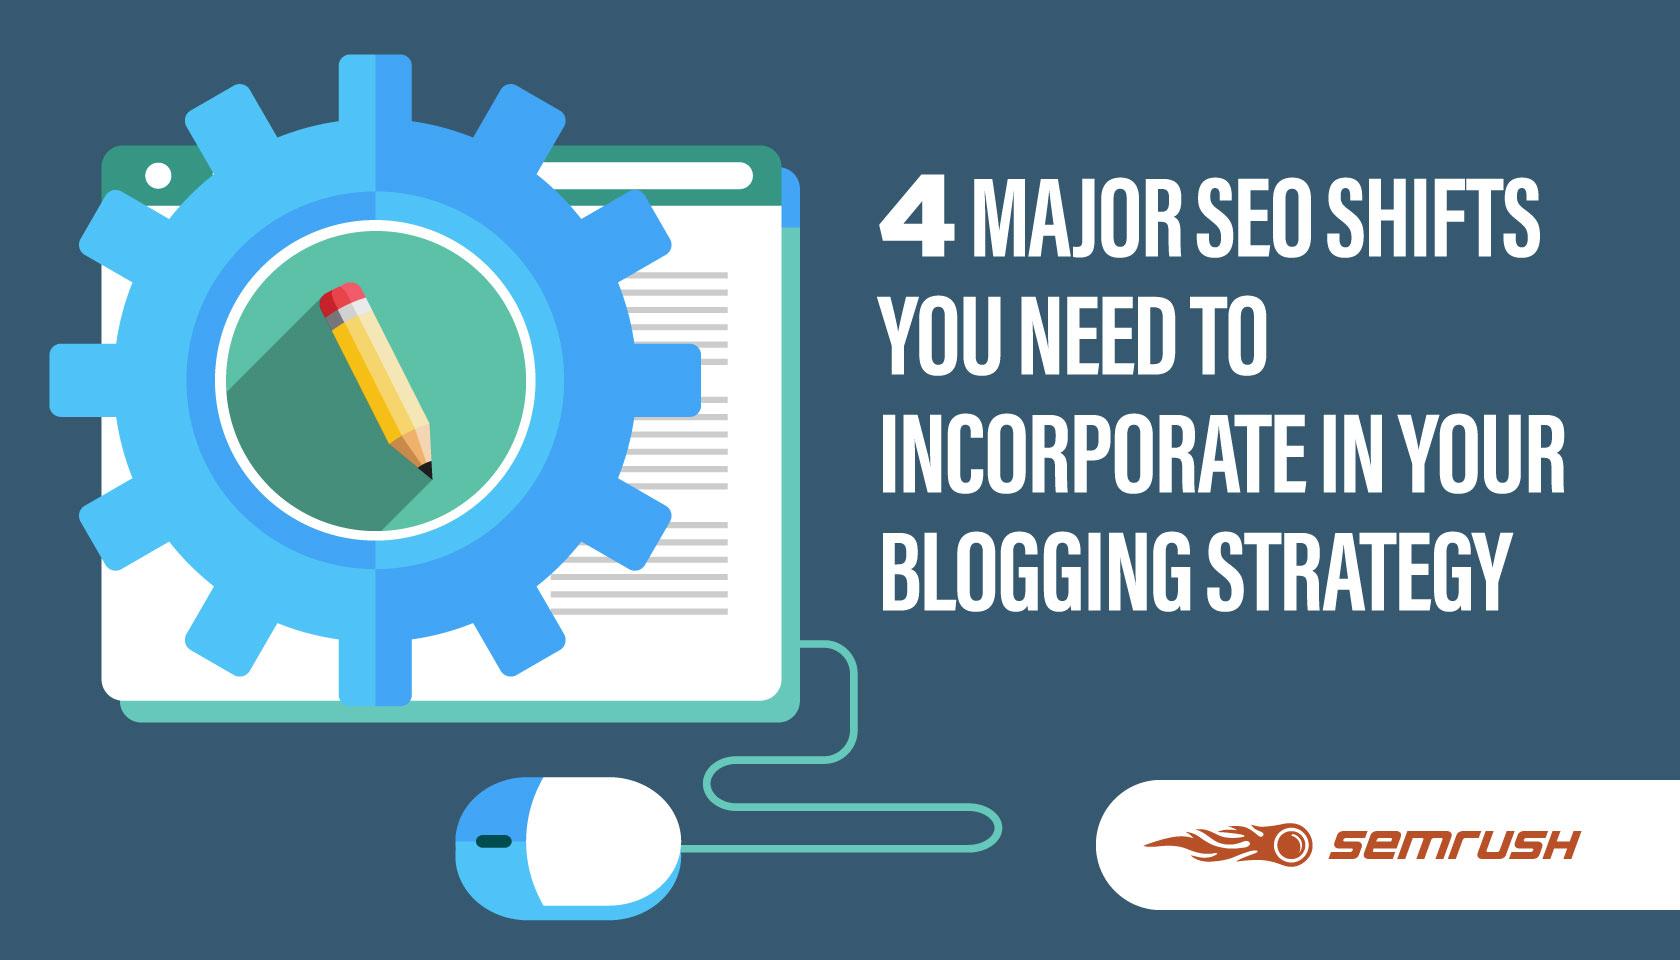 4 Major SEO Shifts To Incorporate